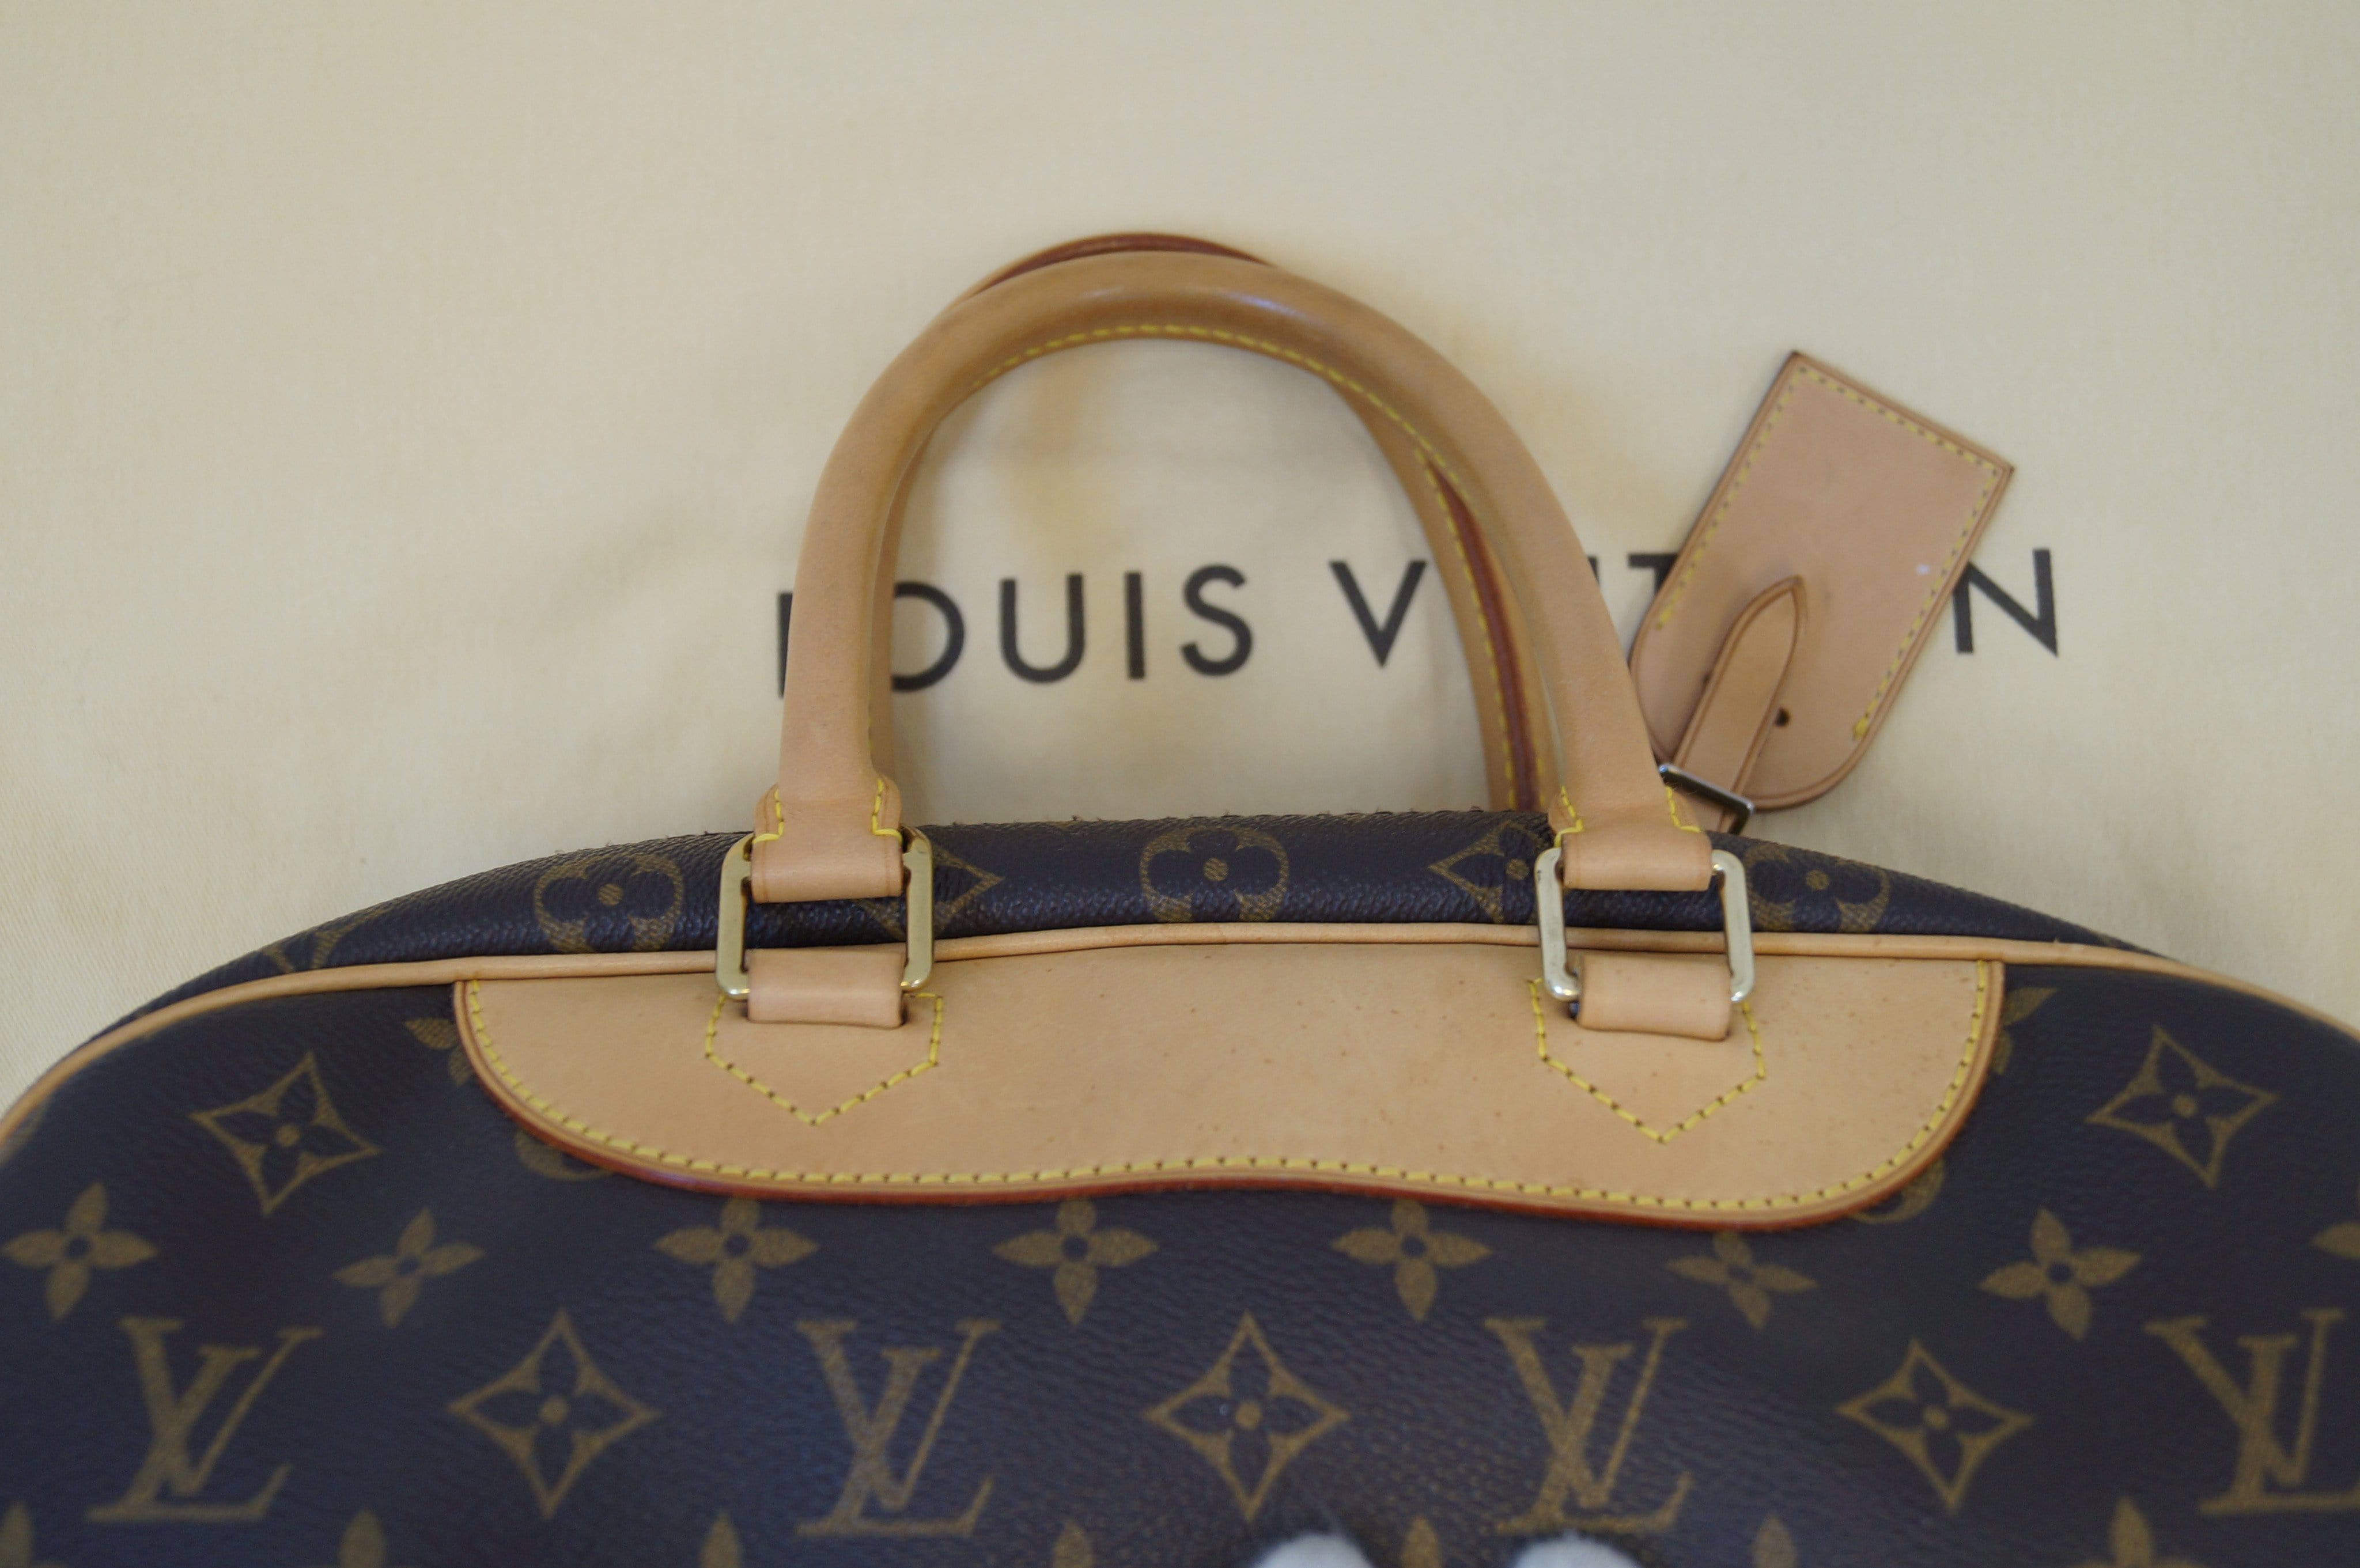 Travel in Style - Bag Yourself an Original Louis Vuitton (or Eight)